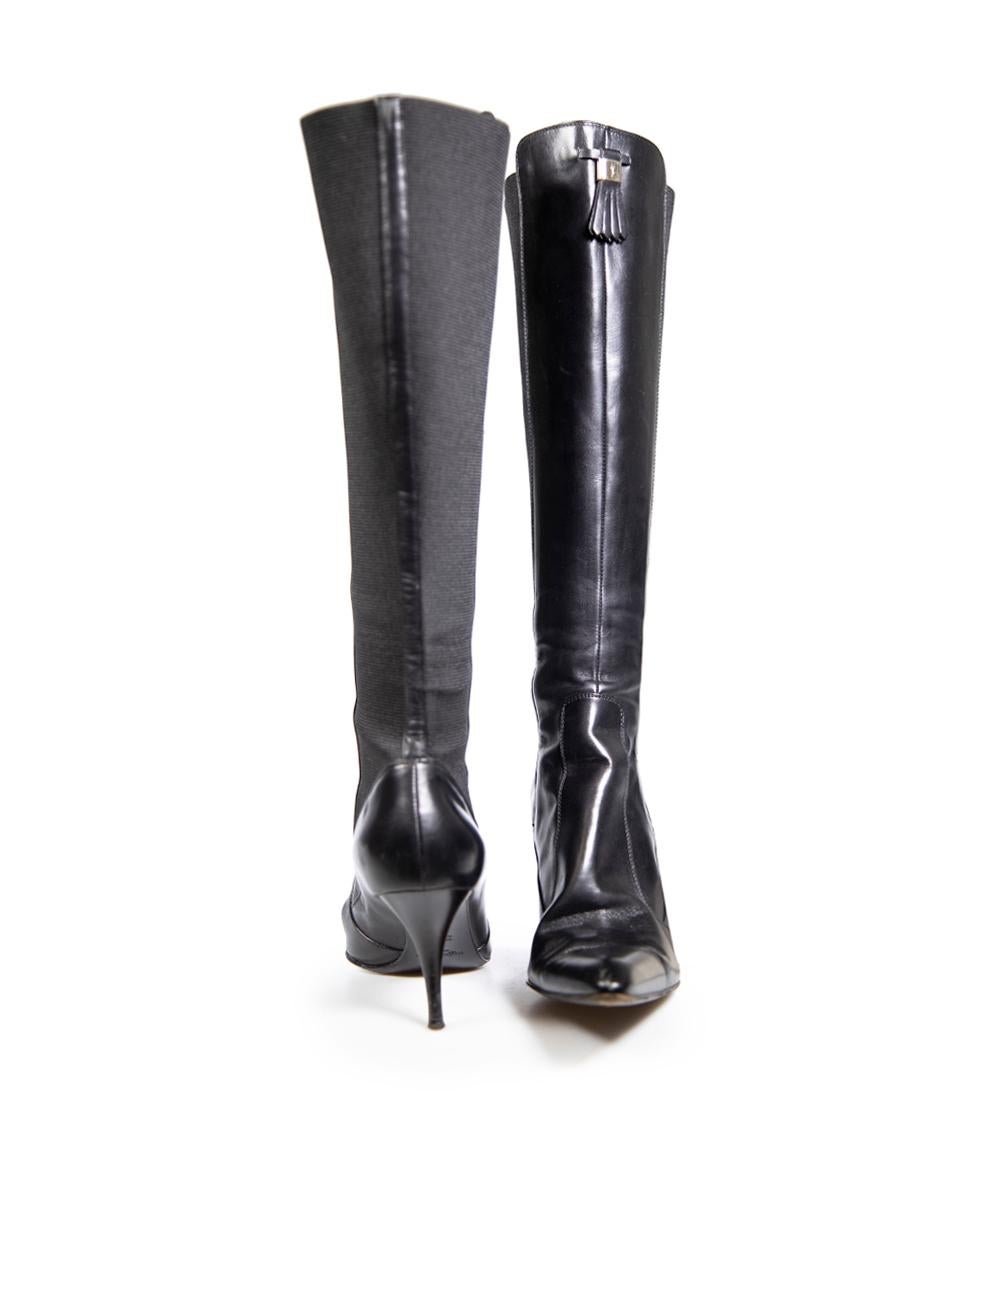 Saint Laurent Black Leather Tassel Knee-High Boots Size IT 38 In Good Condition For Sale In London, GB